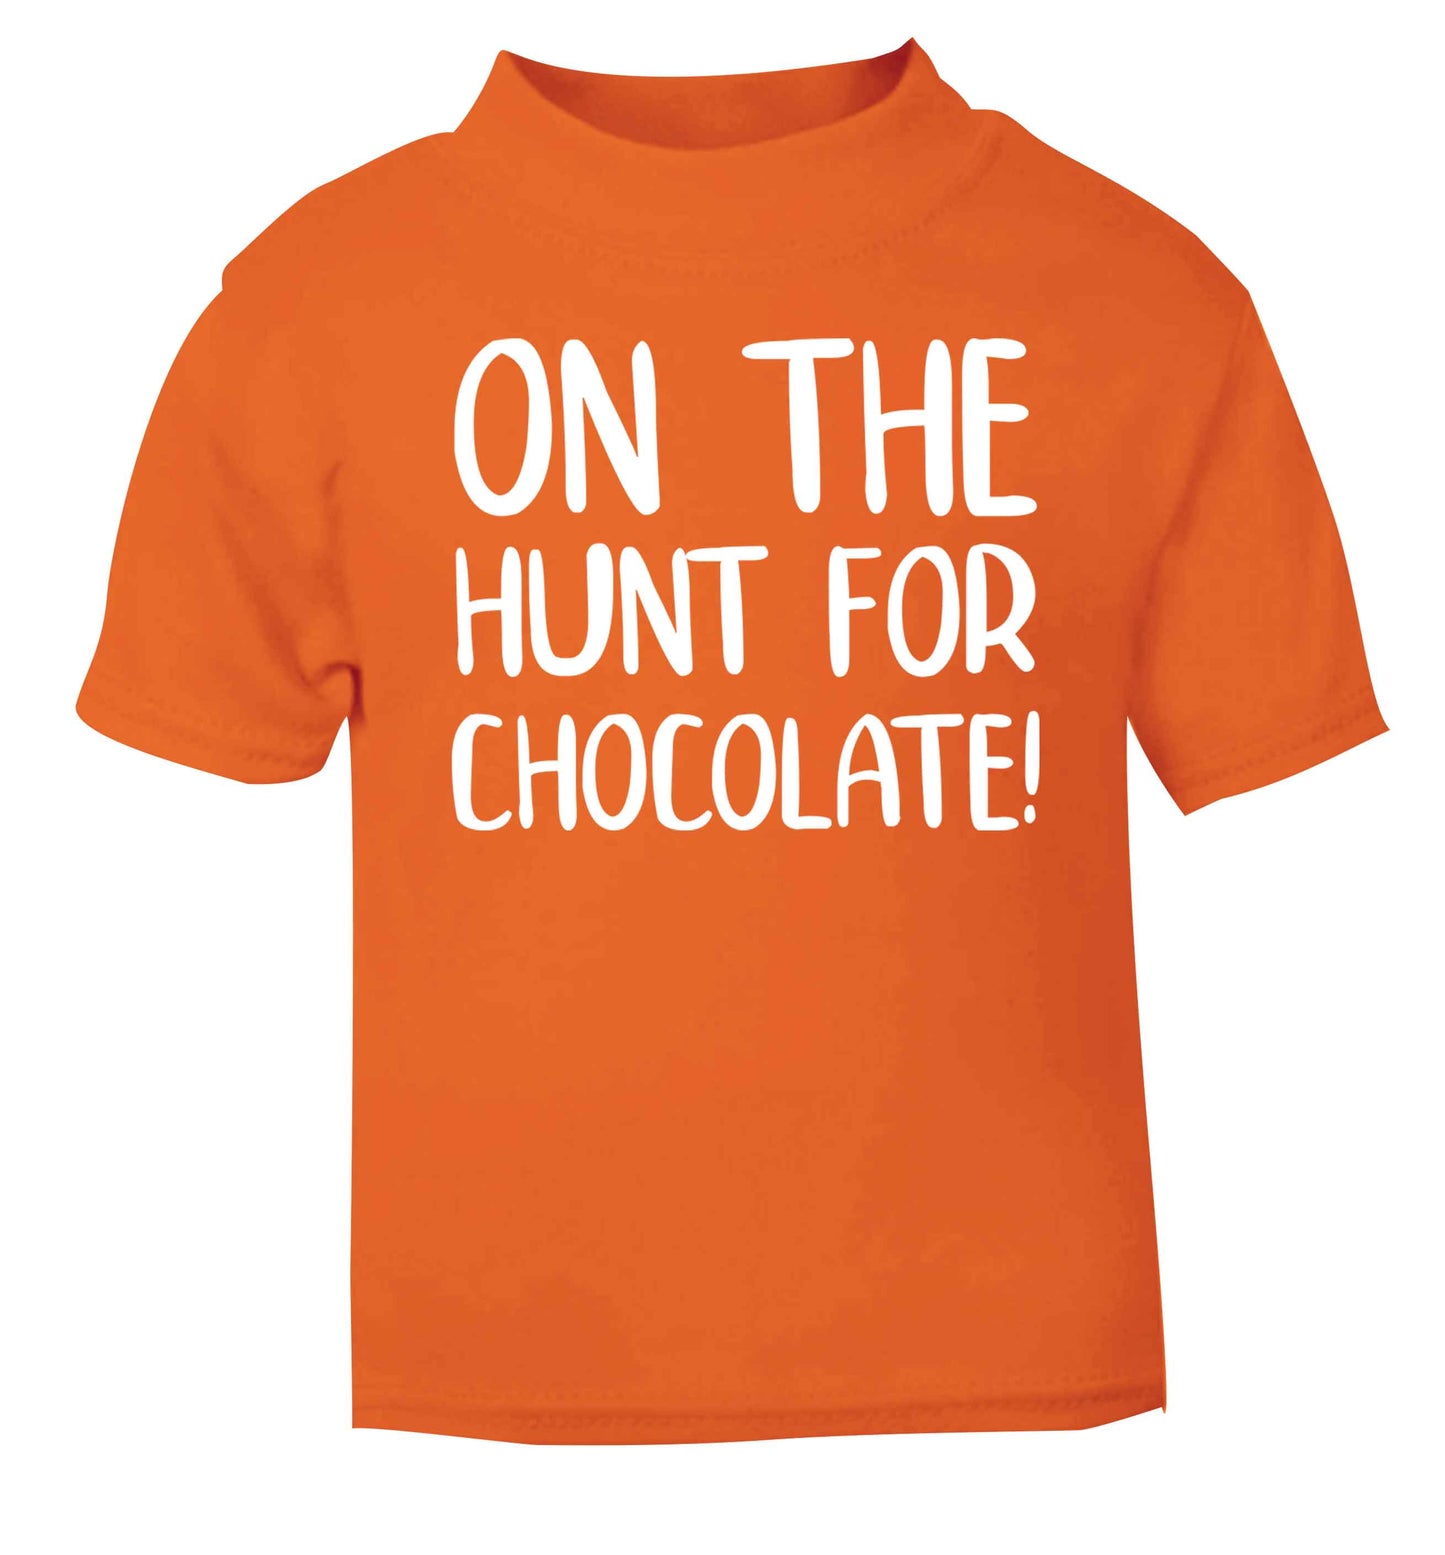 On the hunt for chocolate! orange baby toddler Tshirt 2 Years